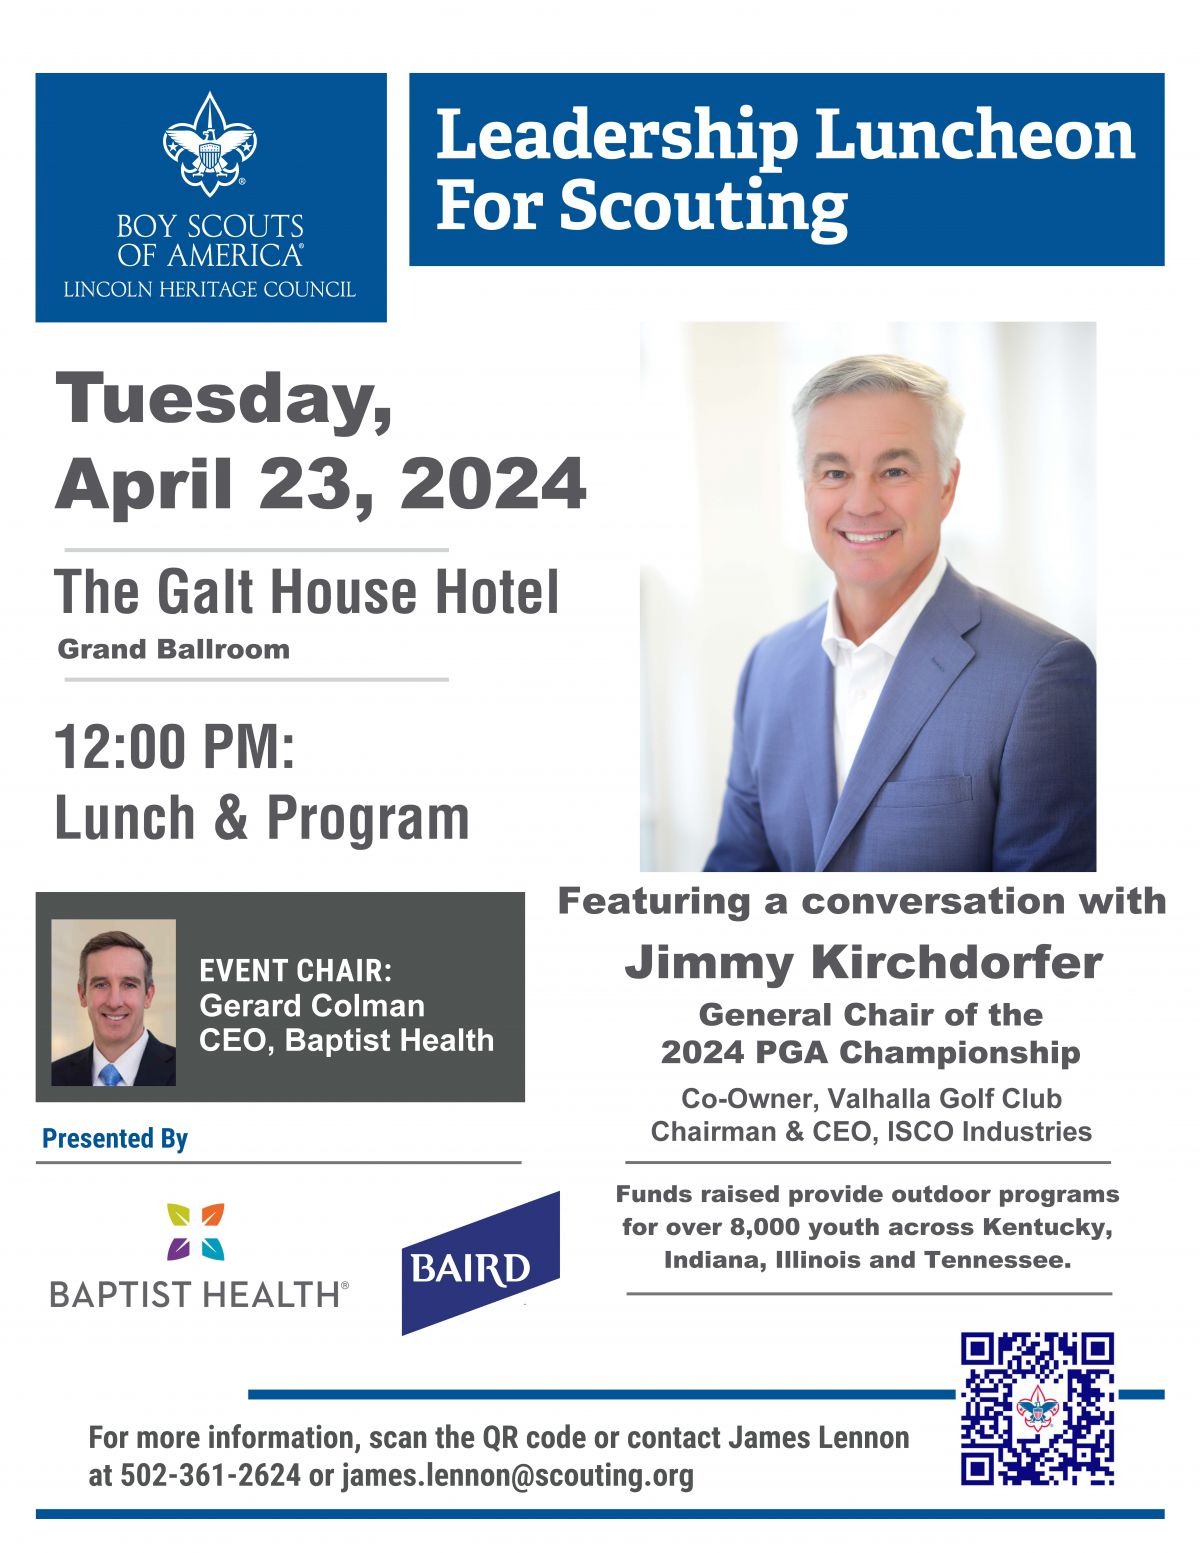 Lincoln Heritage Council, Boy Scouts of America 2024 Leadership Luncheon Flyer